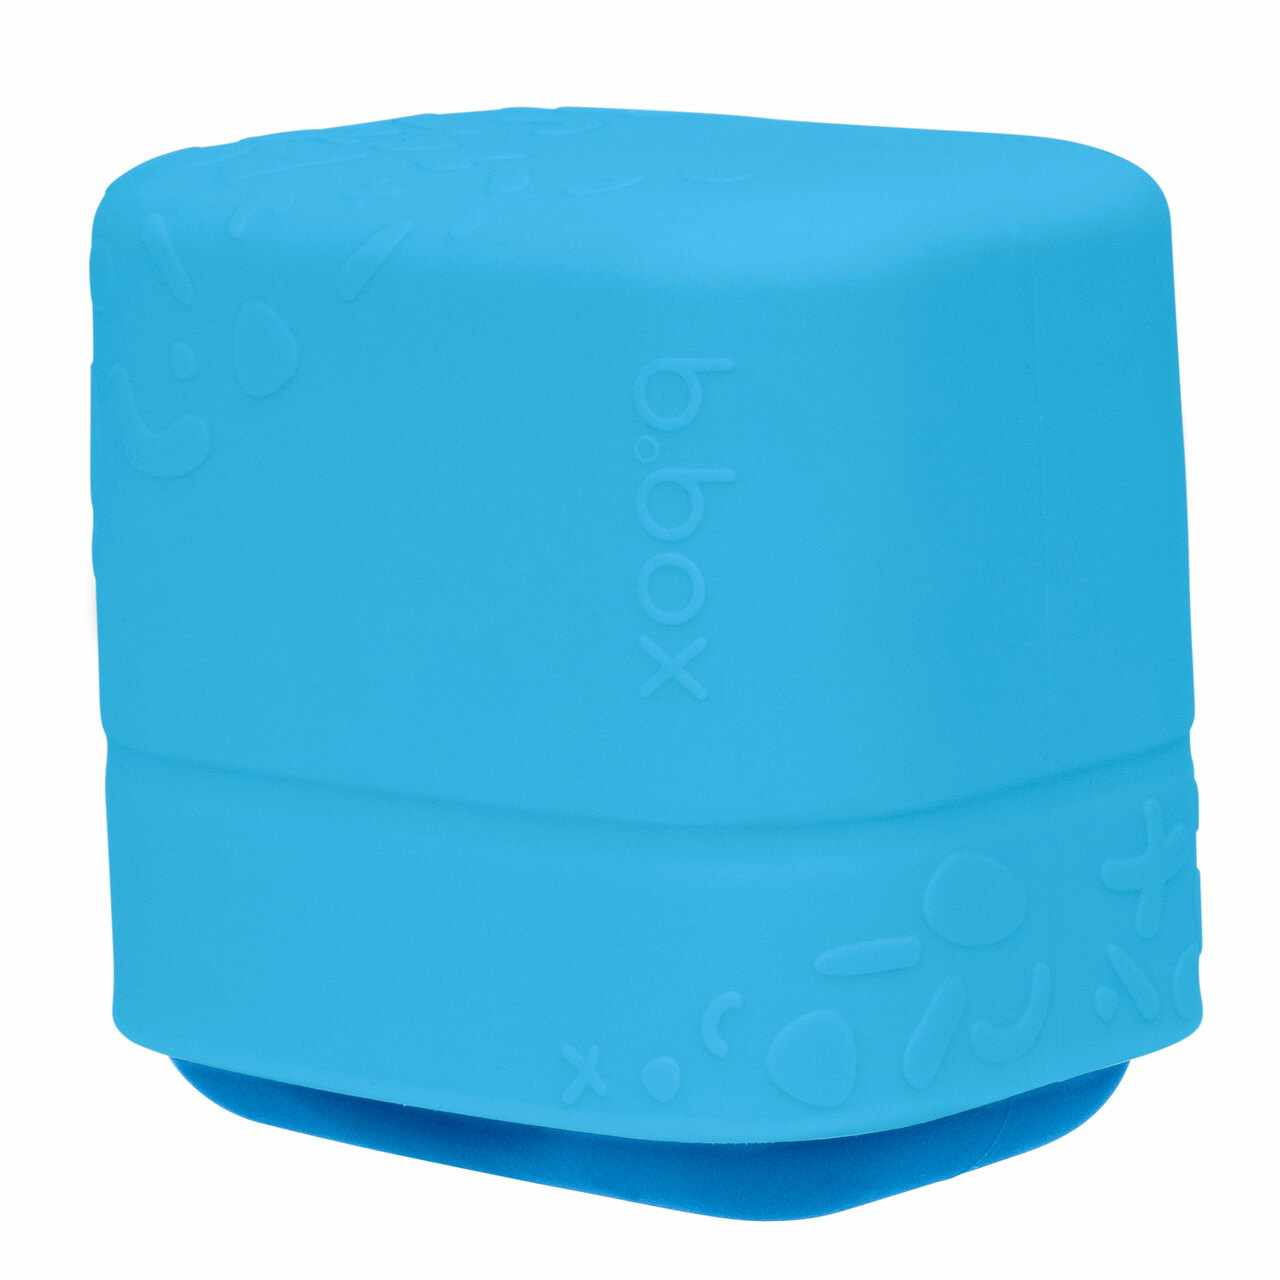 https://www.babyonthemove.co.nz/wp-content/uploads/2022/05/123422_Silicone_Snack_Cups_01_Ocean-3.jpg